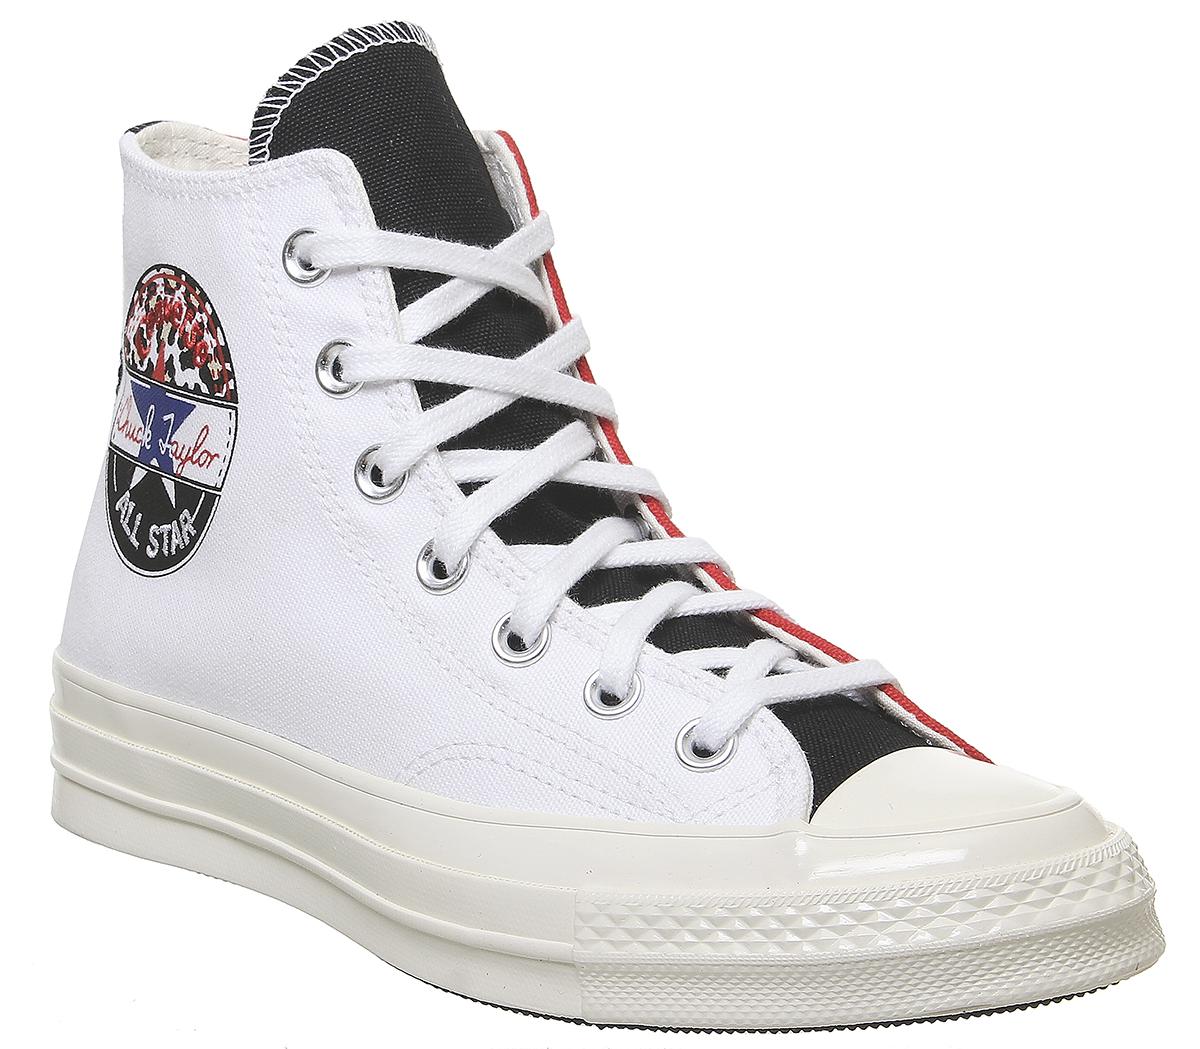 red white converse all stars